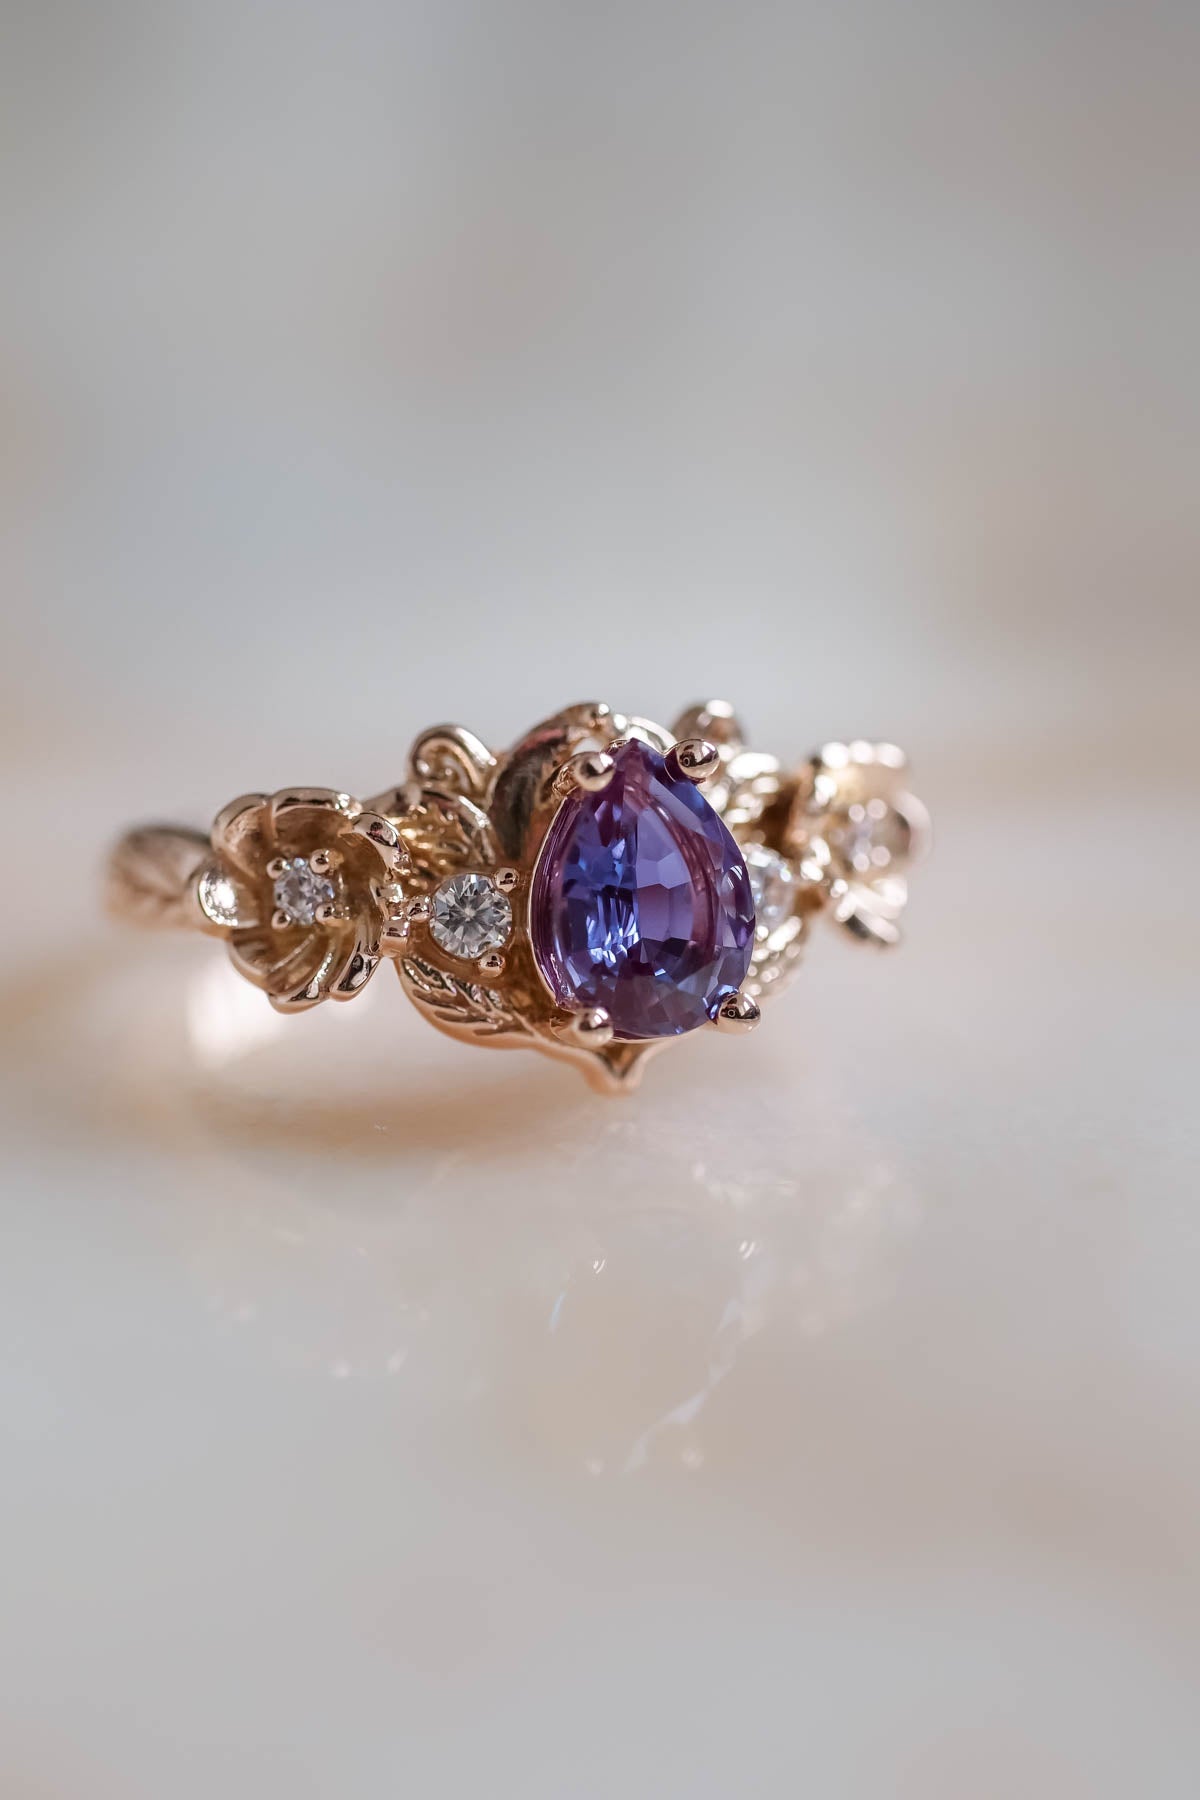 Engagement ring with pear cut alexandrite in rose gold / Adelina | Eden ...